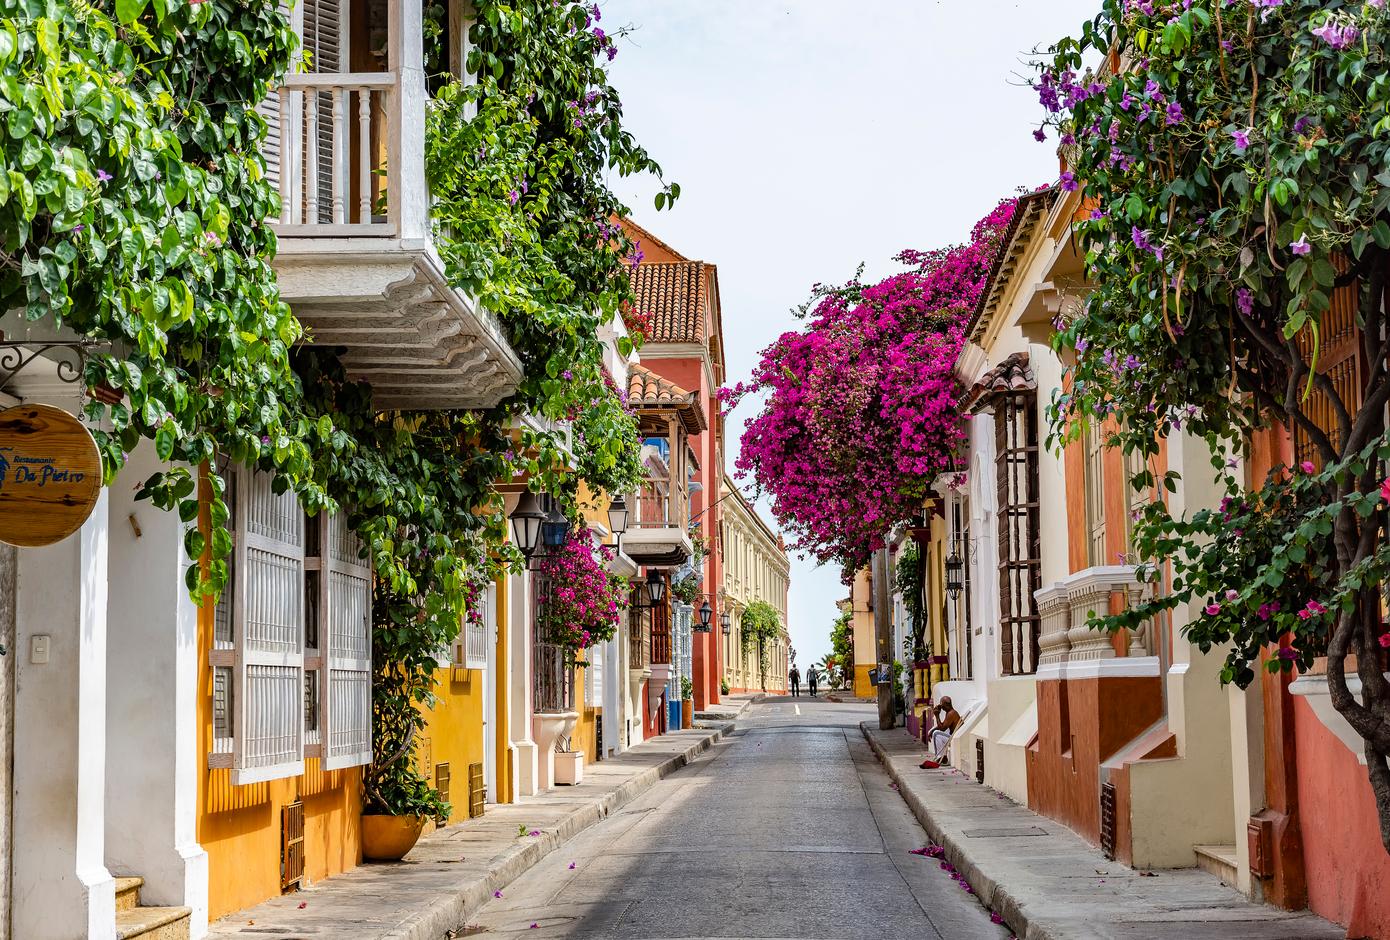 A street lined with colorful houses decorated with cascading bougainvilleas in Cartagena, Colombia.